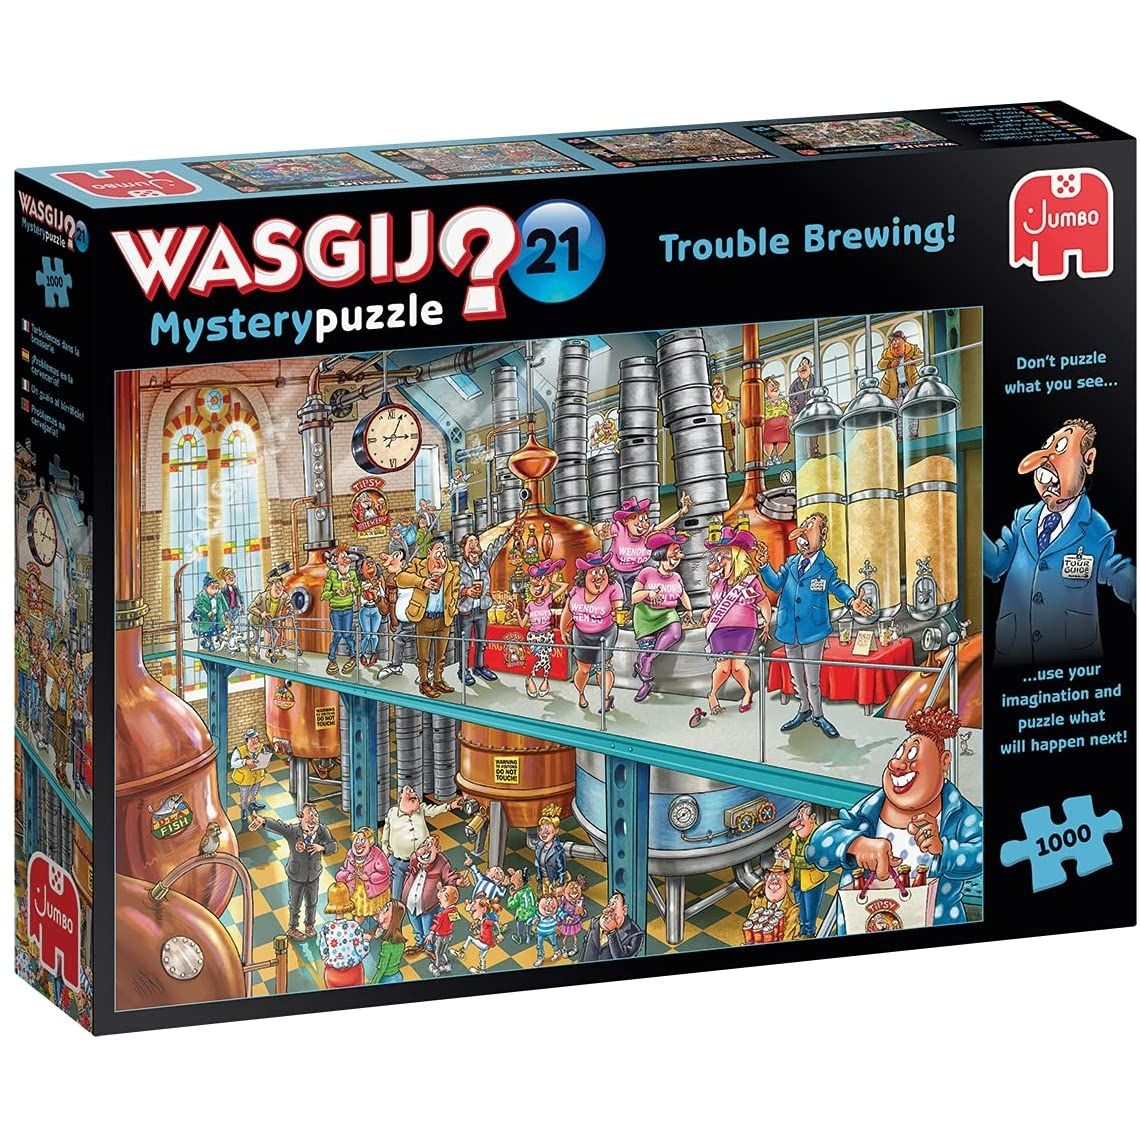 Jigsaw Puzzle - (Wasgij 21) - TROUBLE BREWING - 1000 Pieces